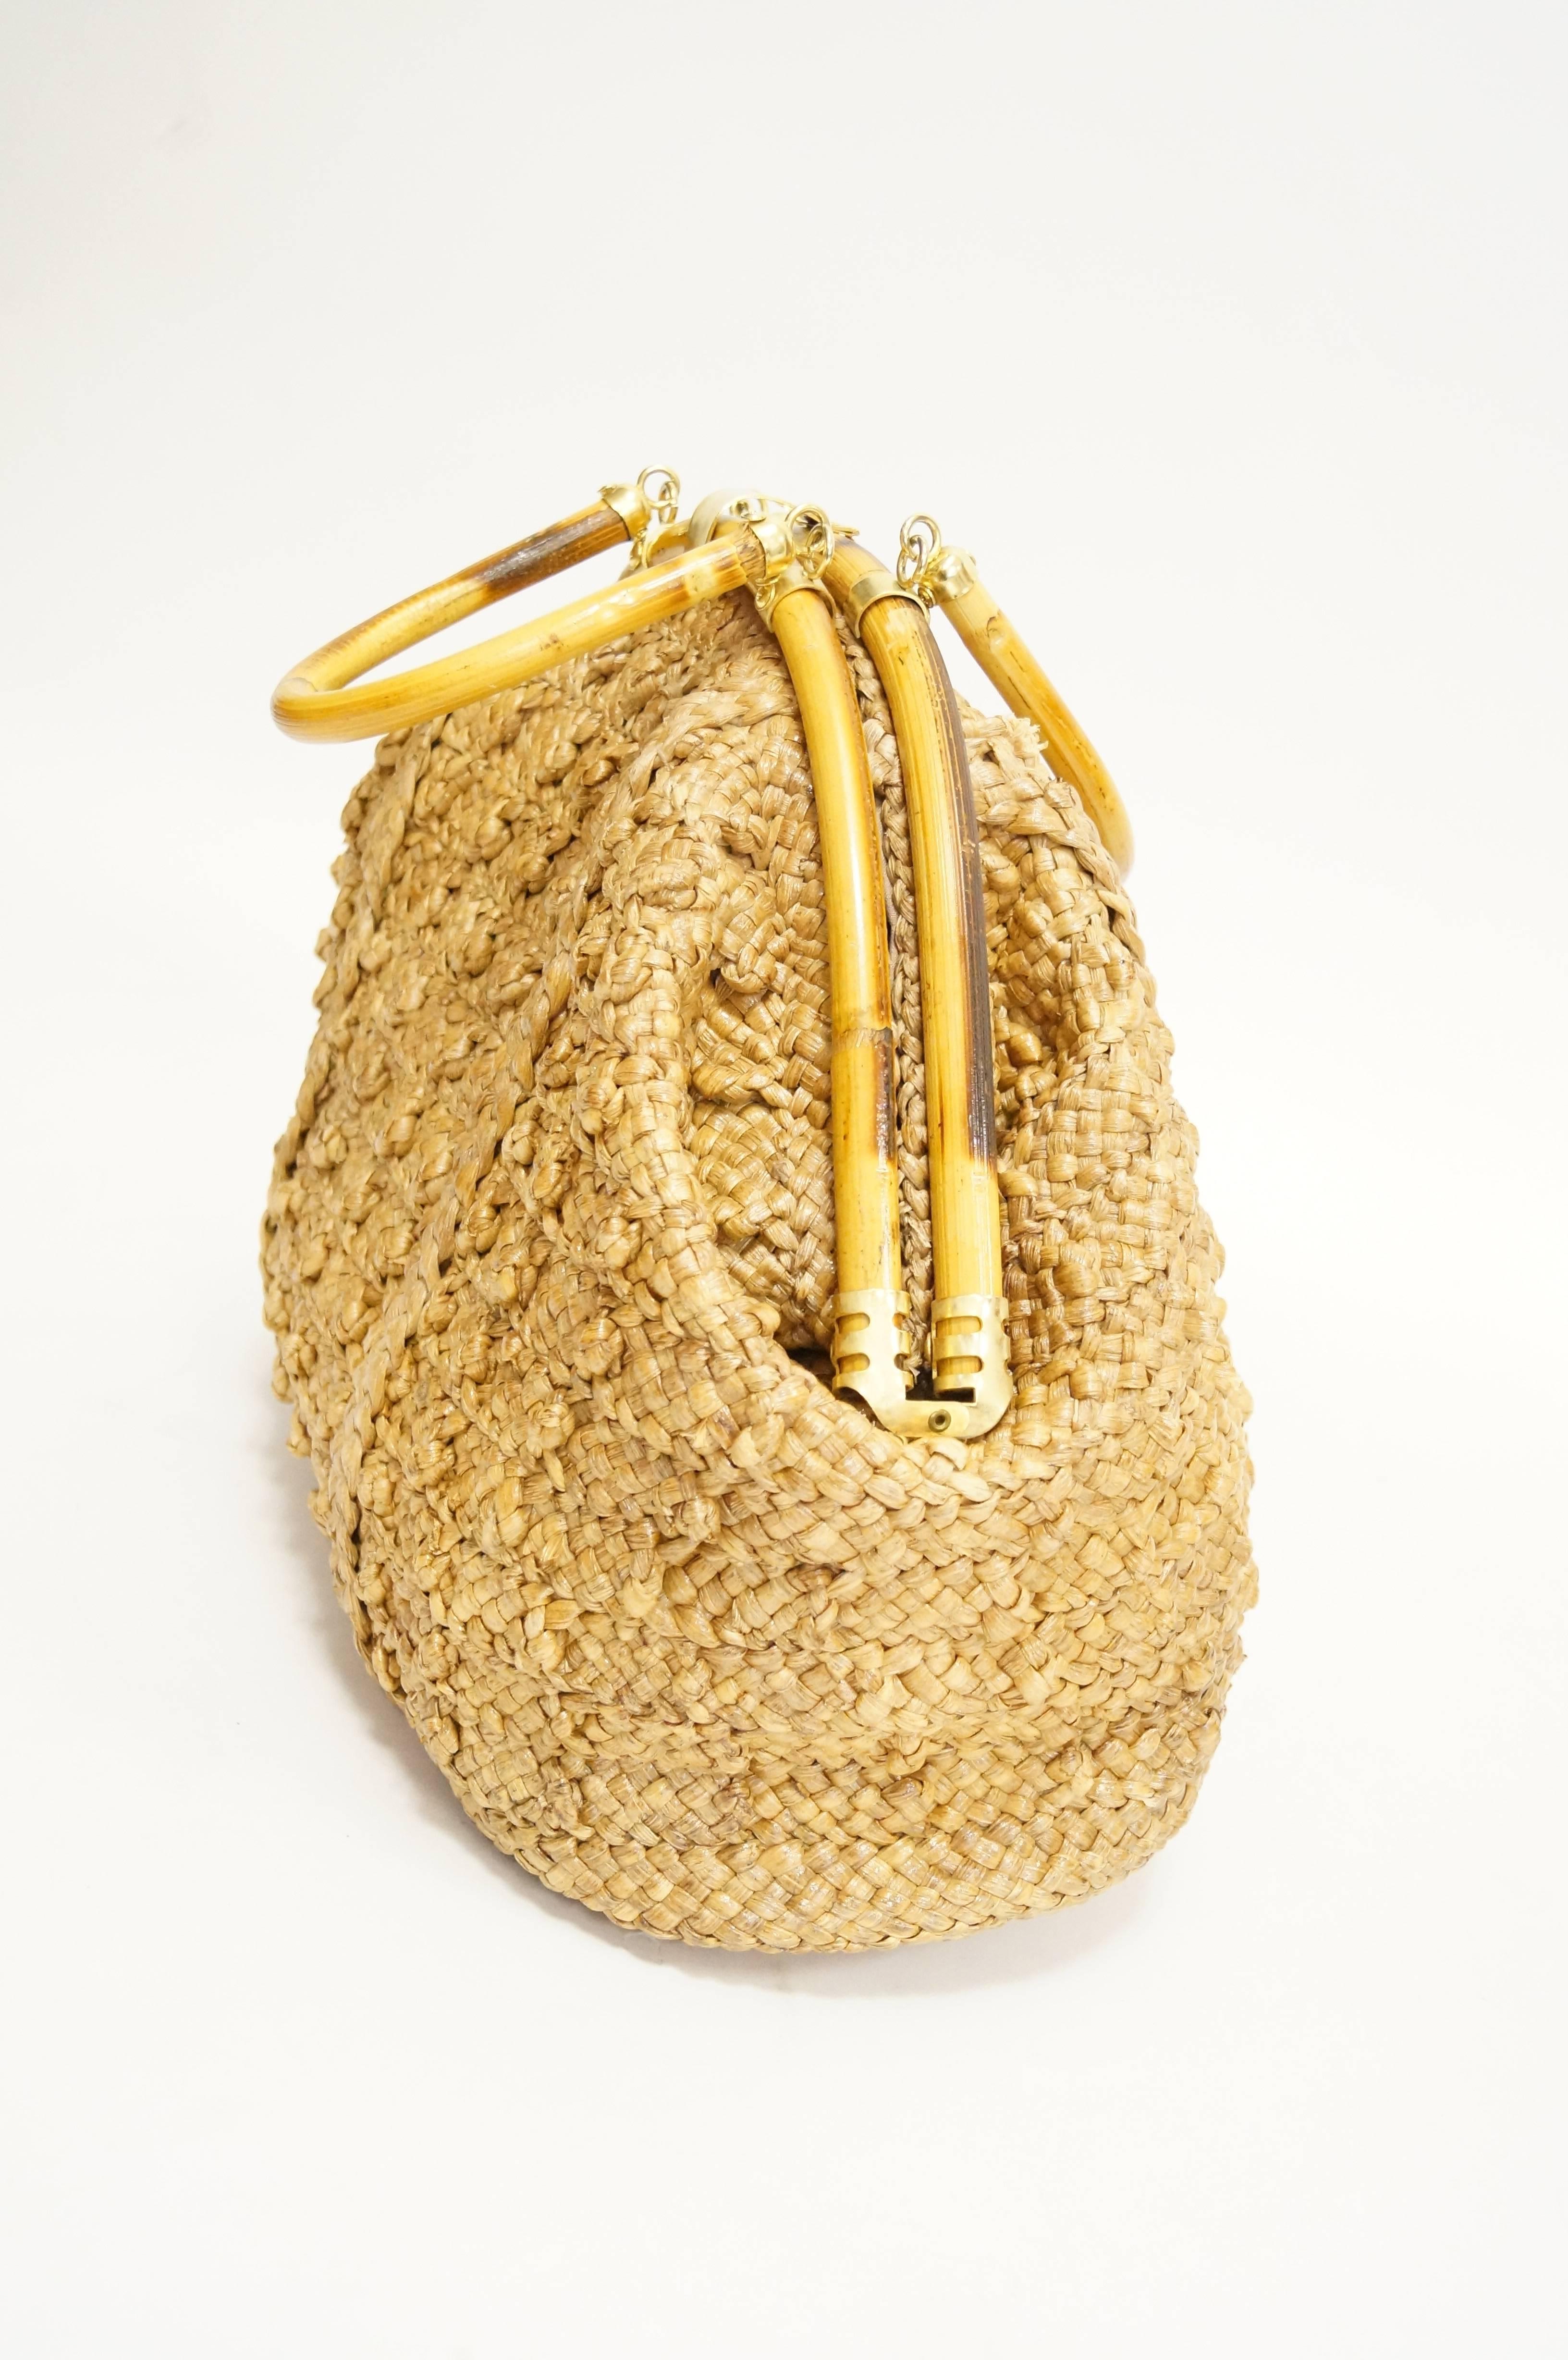 Sculptural hand woven bag by Delill! The bag is composed of woven grass carefully treated with resin, giving it a glossy shine and adding to its durability. The grass is woven in a criss-cross pattern, with accent knots and vertical stitching